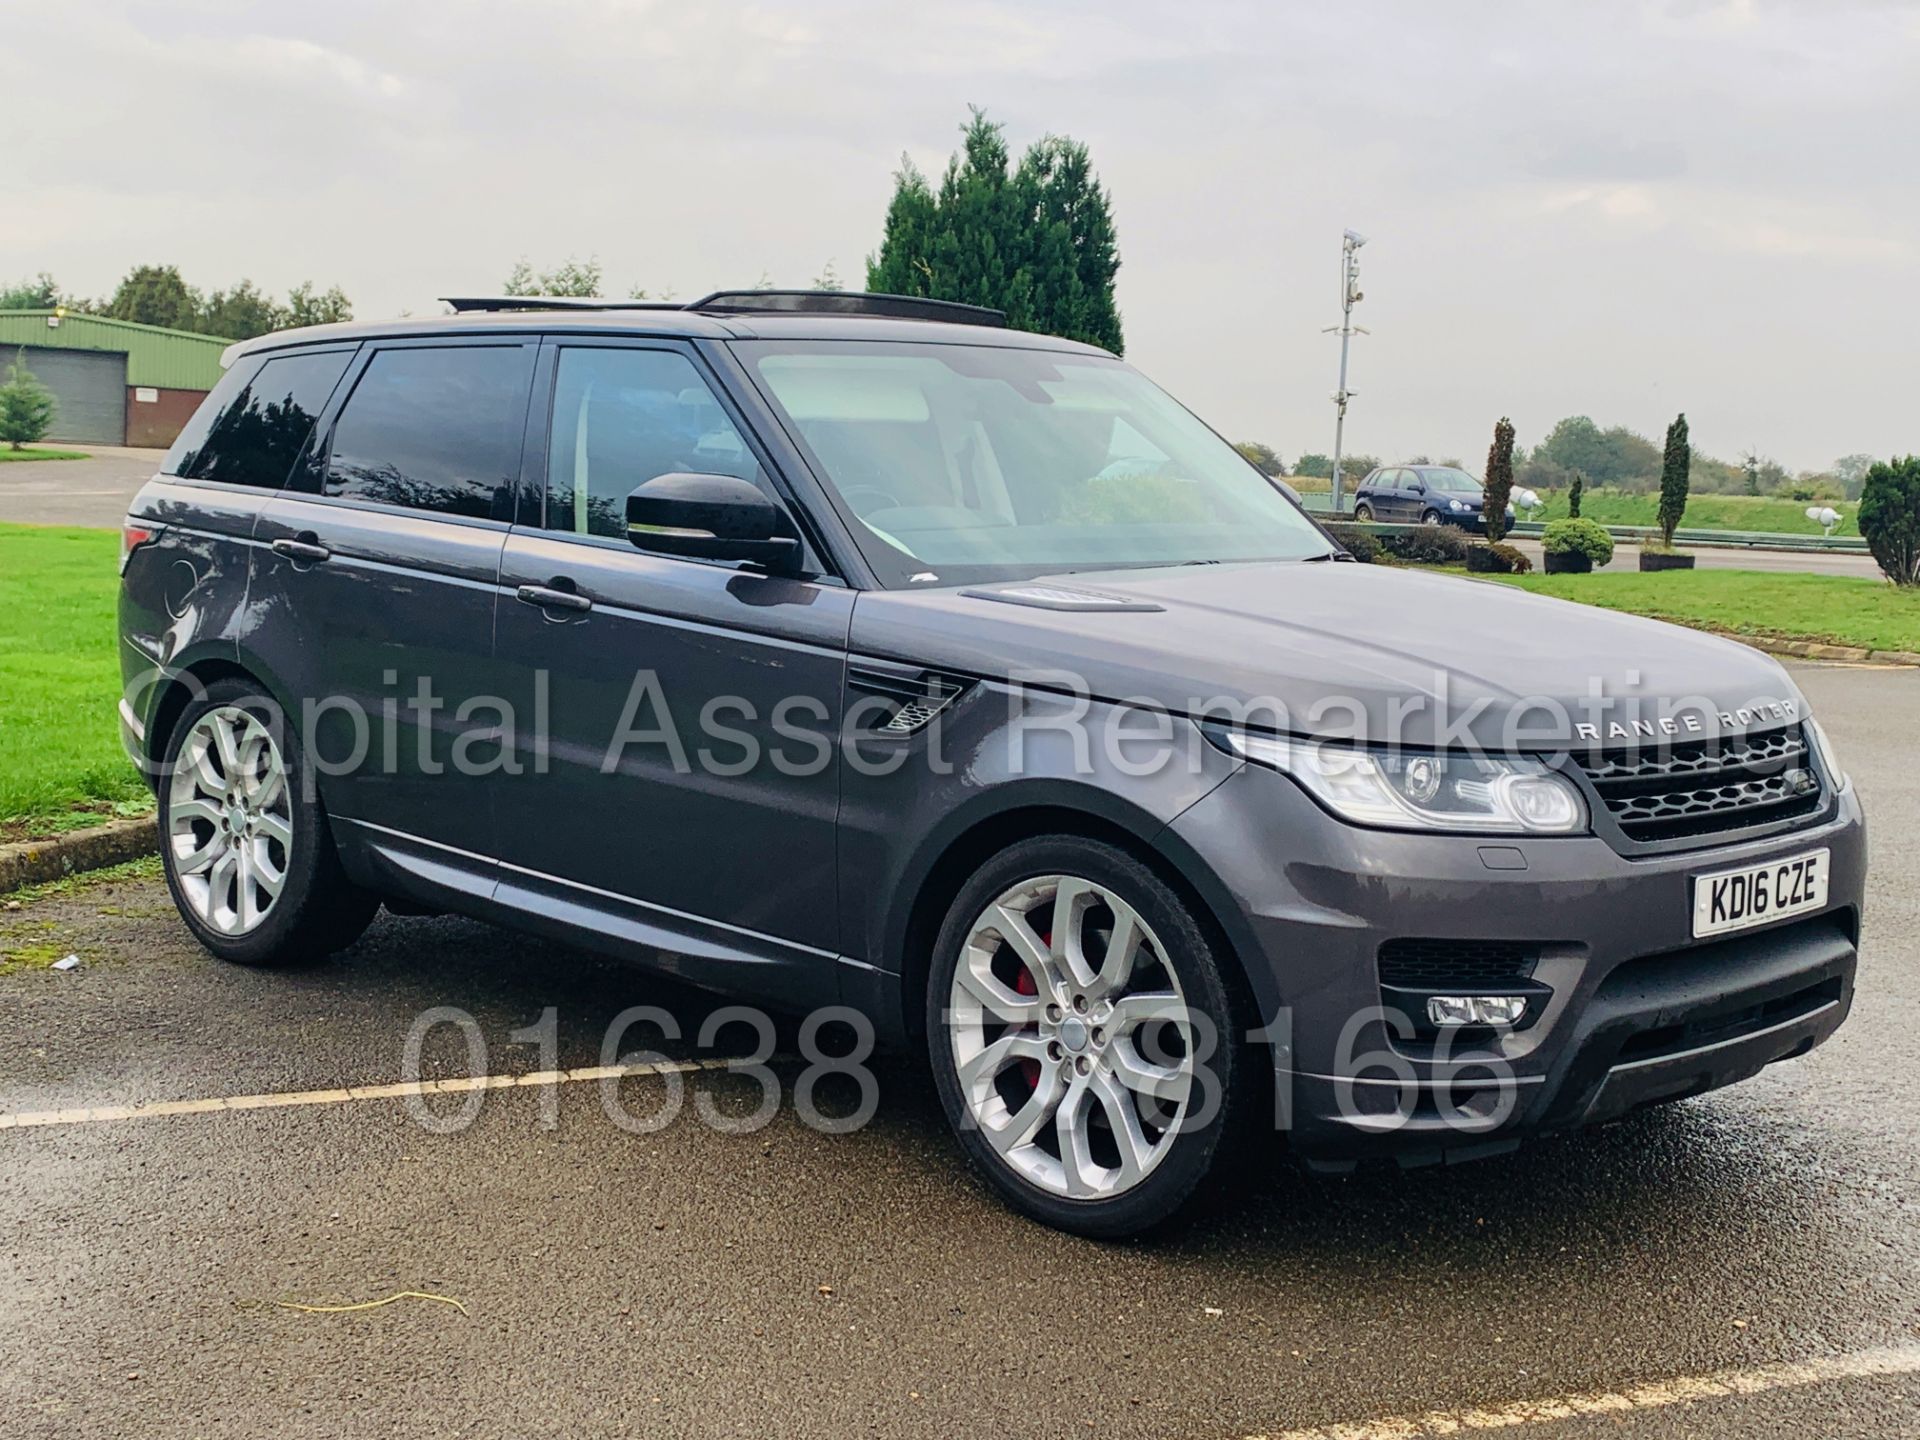 (ON SALE) RANGE ROVER SPORT 3.0 SDV6 *AUTOBIOGRAPHY DYNAMIC*AUTO *FULLY LOADED* MONSTER SPEC *16 REG - Image 10 of 70